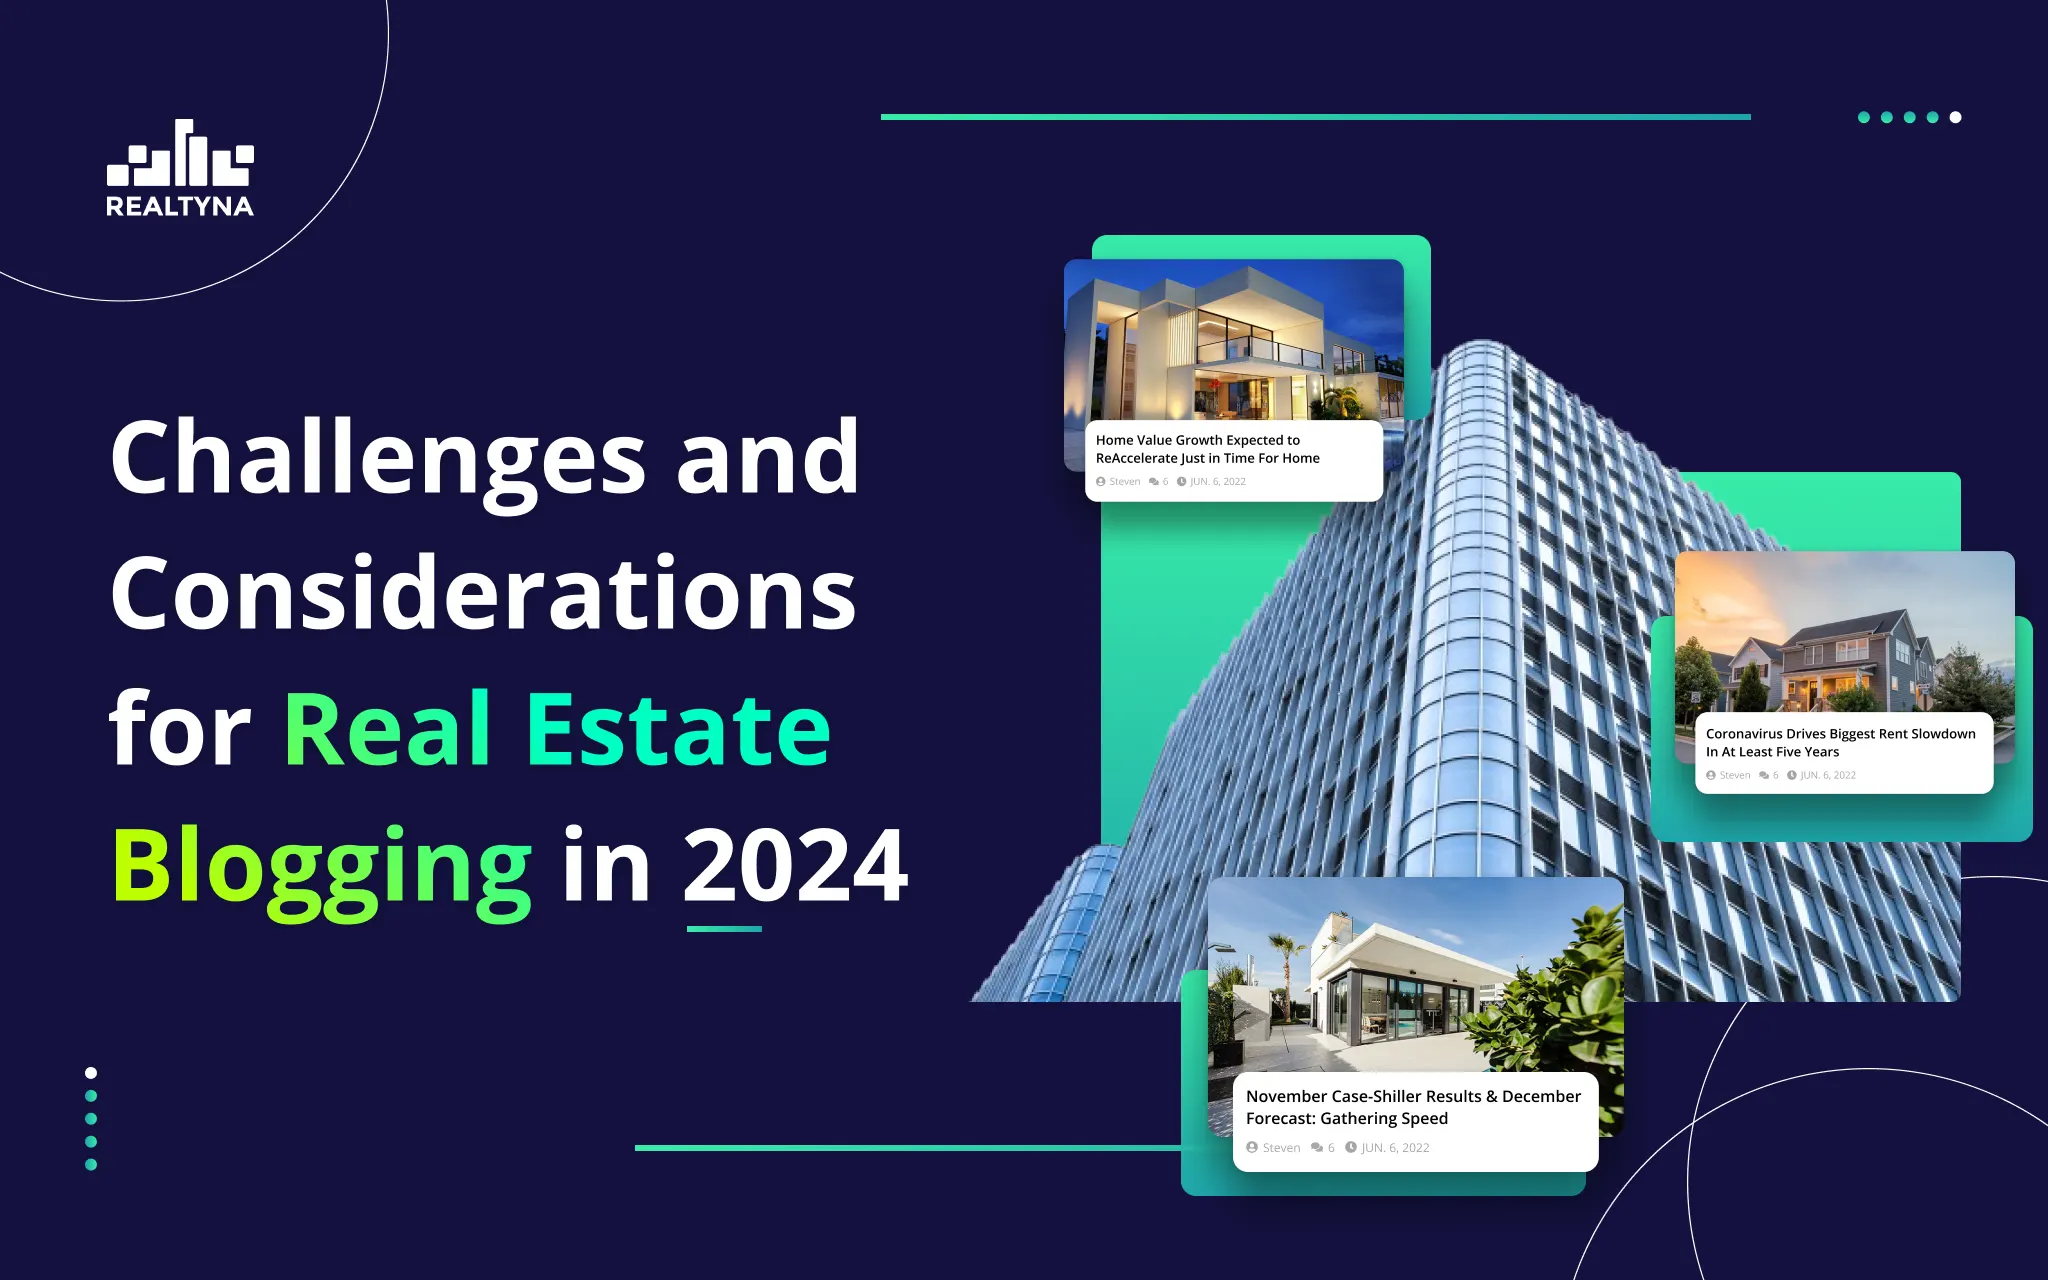 Challenges and Considerations for Real Estate Blogging in 2024